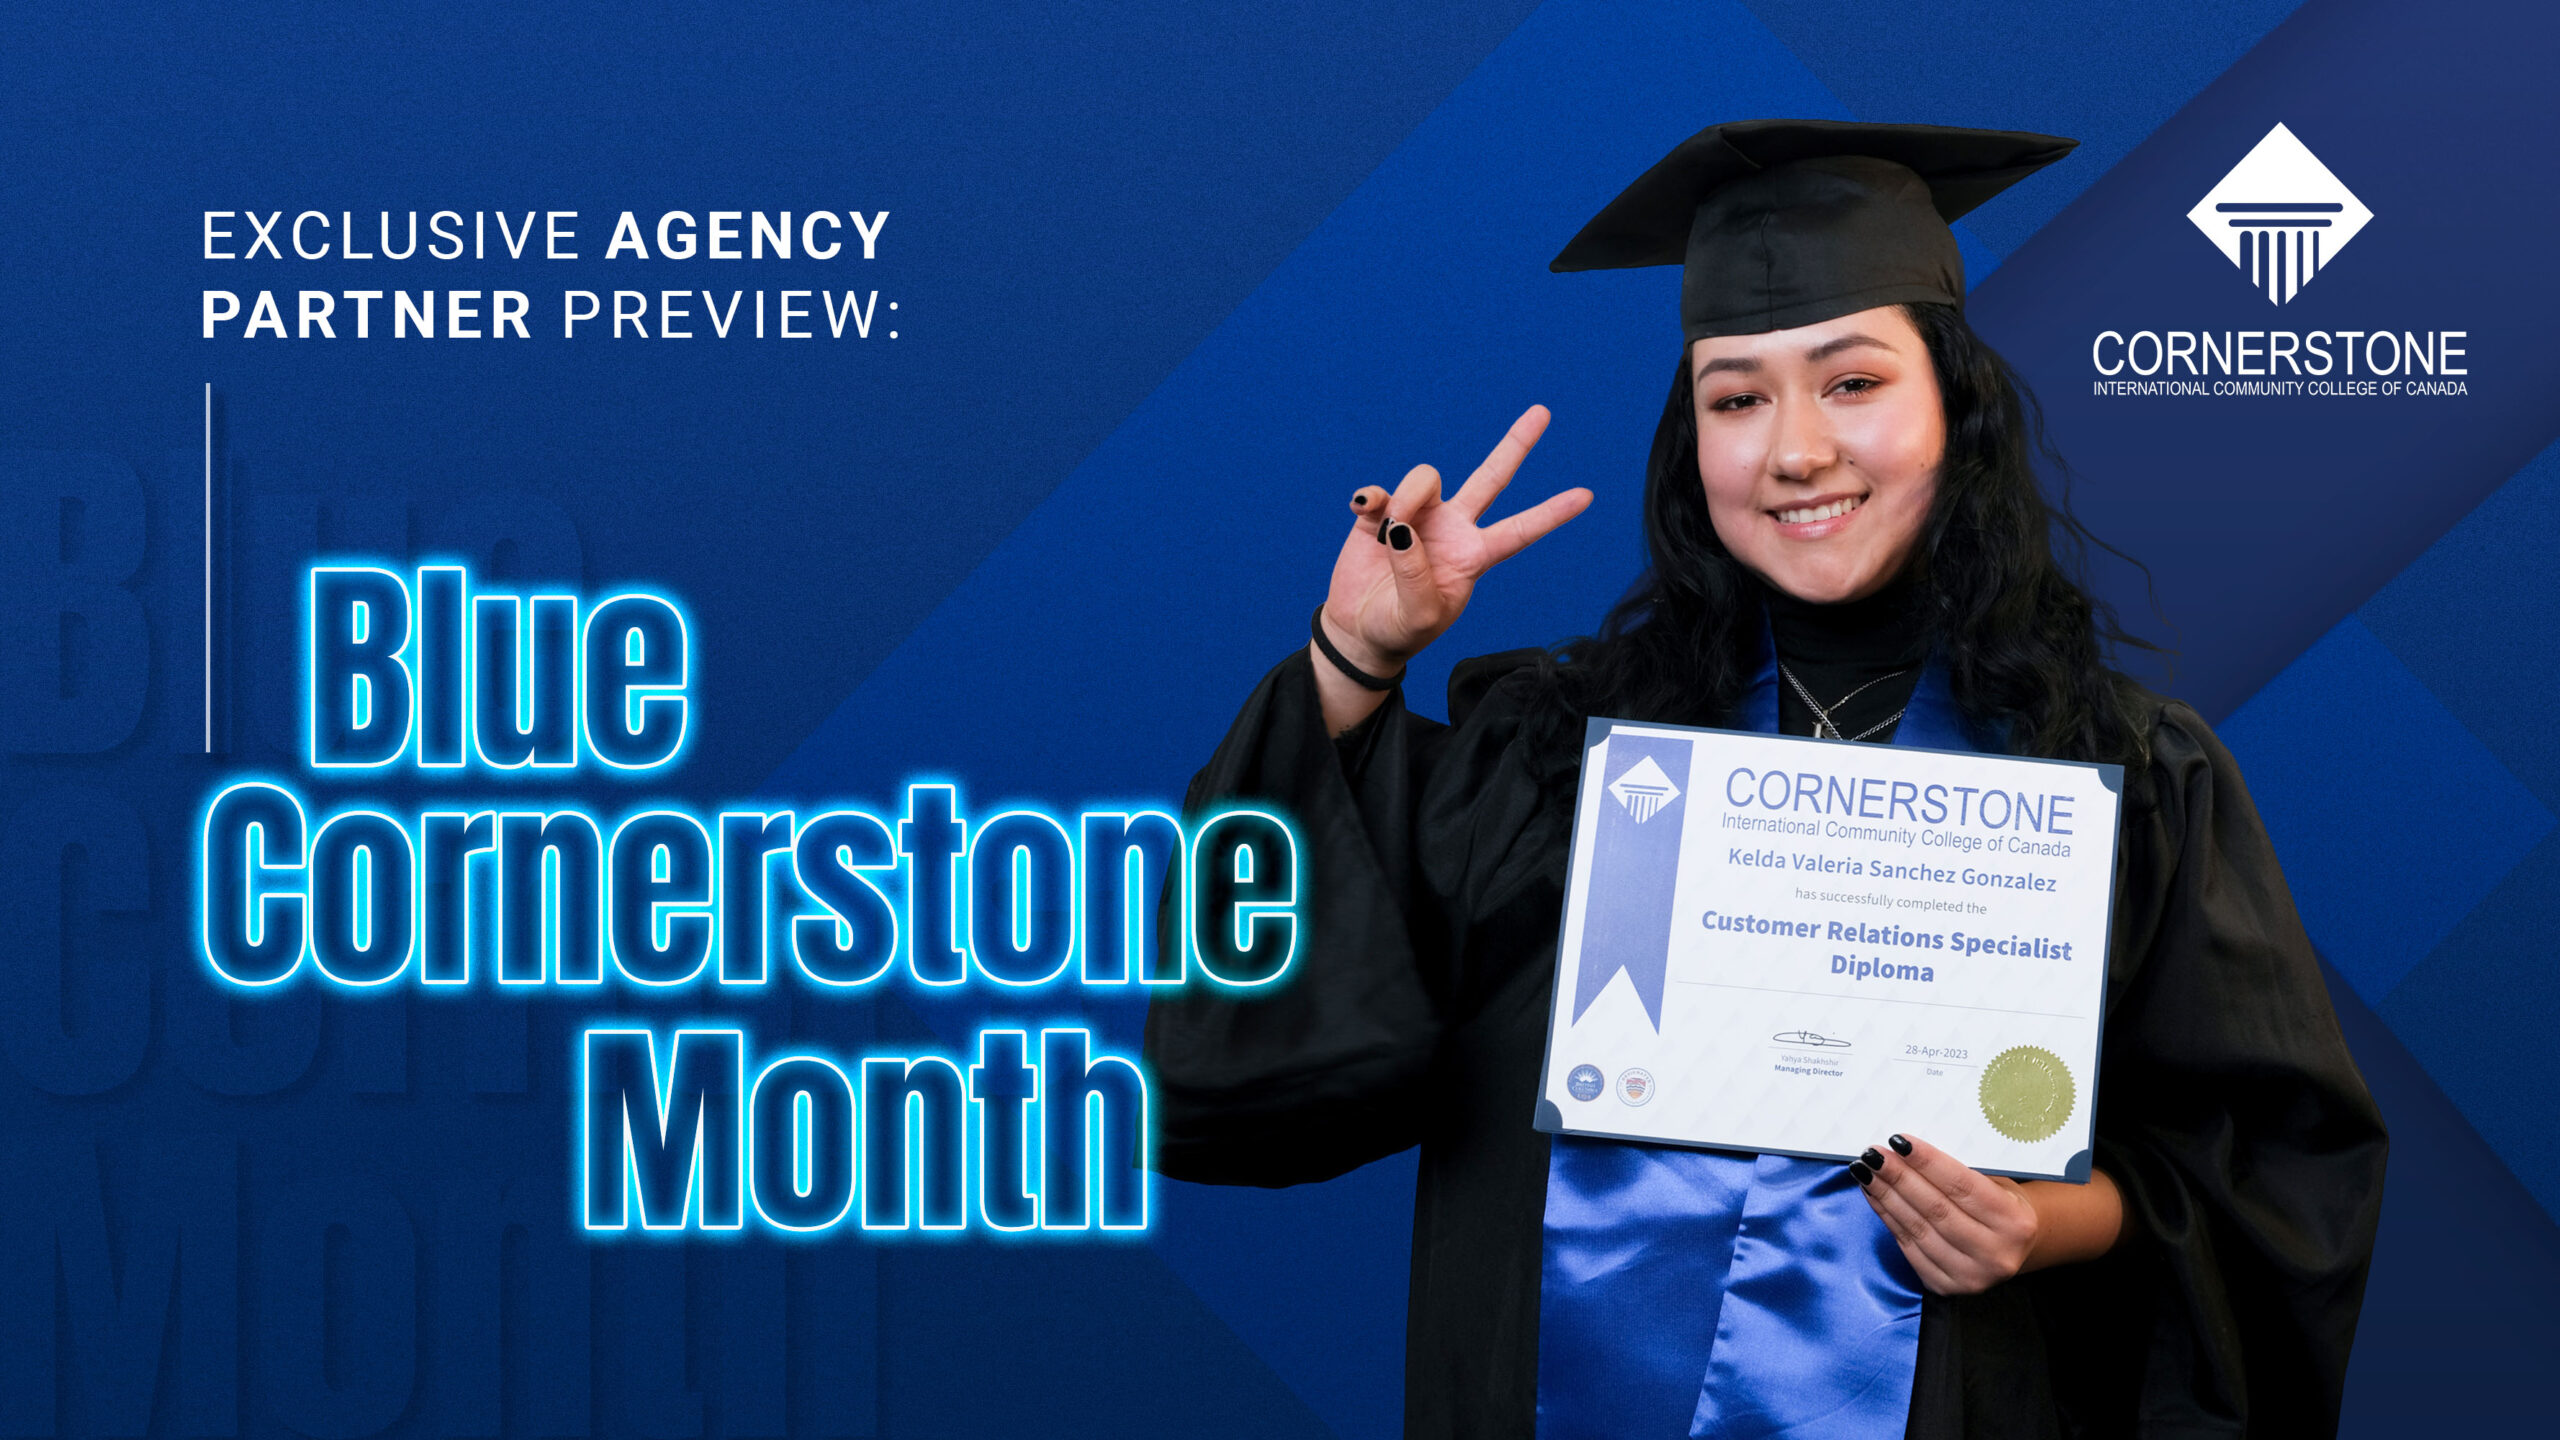 Blue Cornerstone Month: special surprises for our partnering agencies